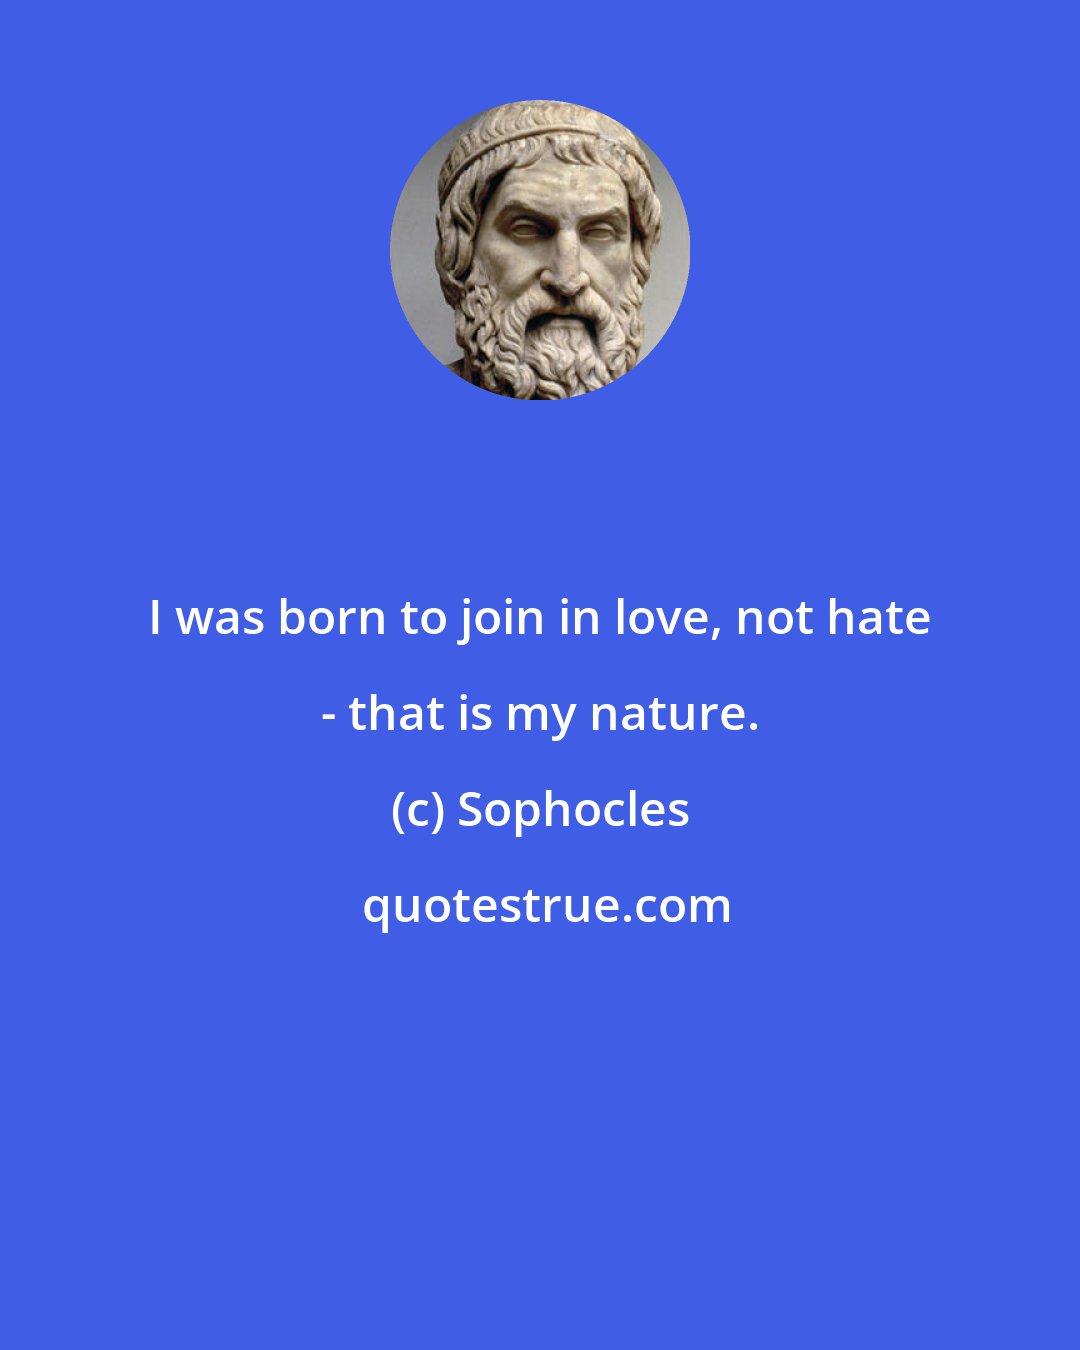 Sophocles: I was born to join in love, not hate - that is my nature.